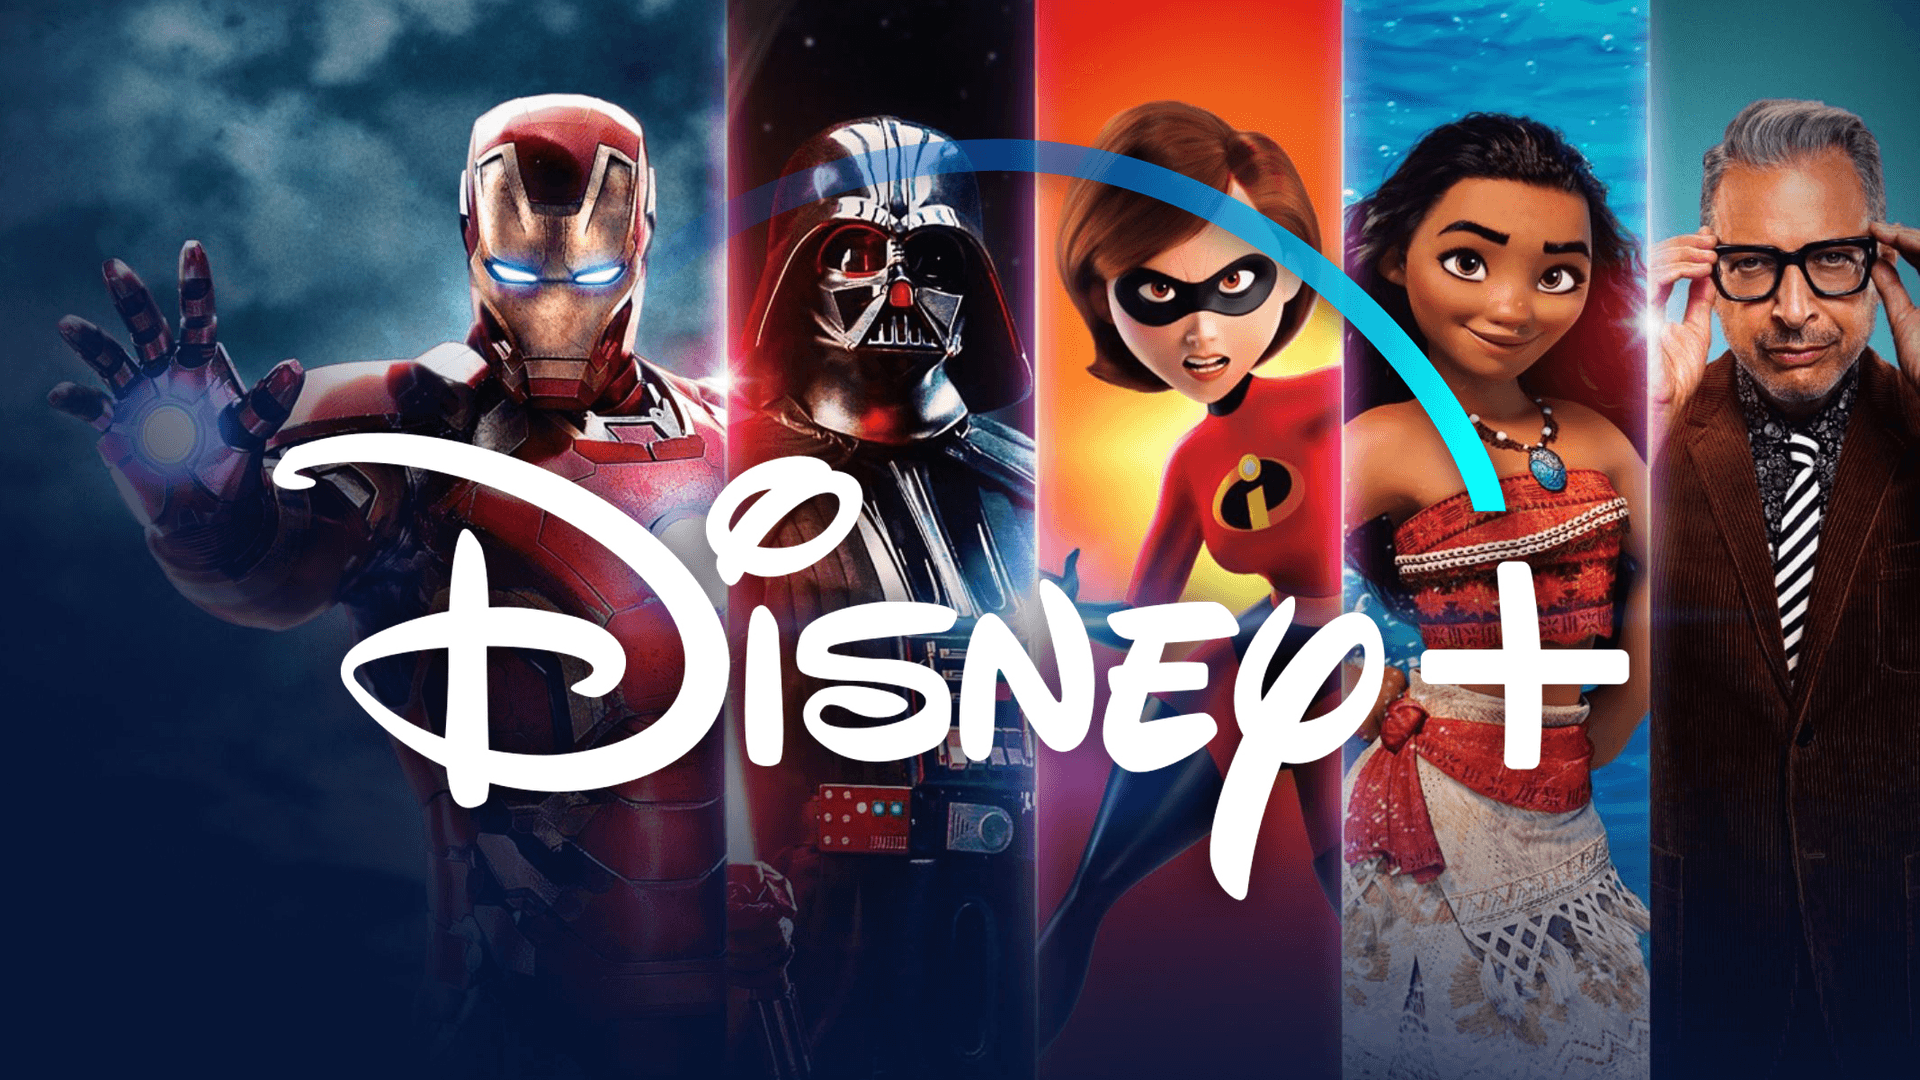 Watch Disney features like Family Guy or Moon Knight. The Disney Plus price increase is not a problem anymore with Together Price.